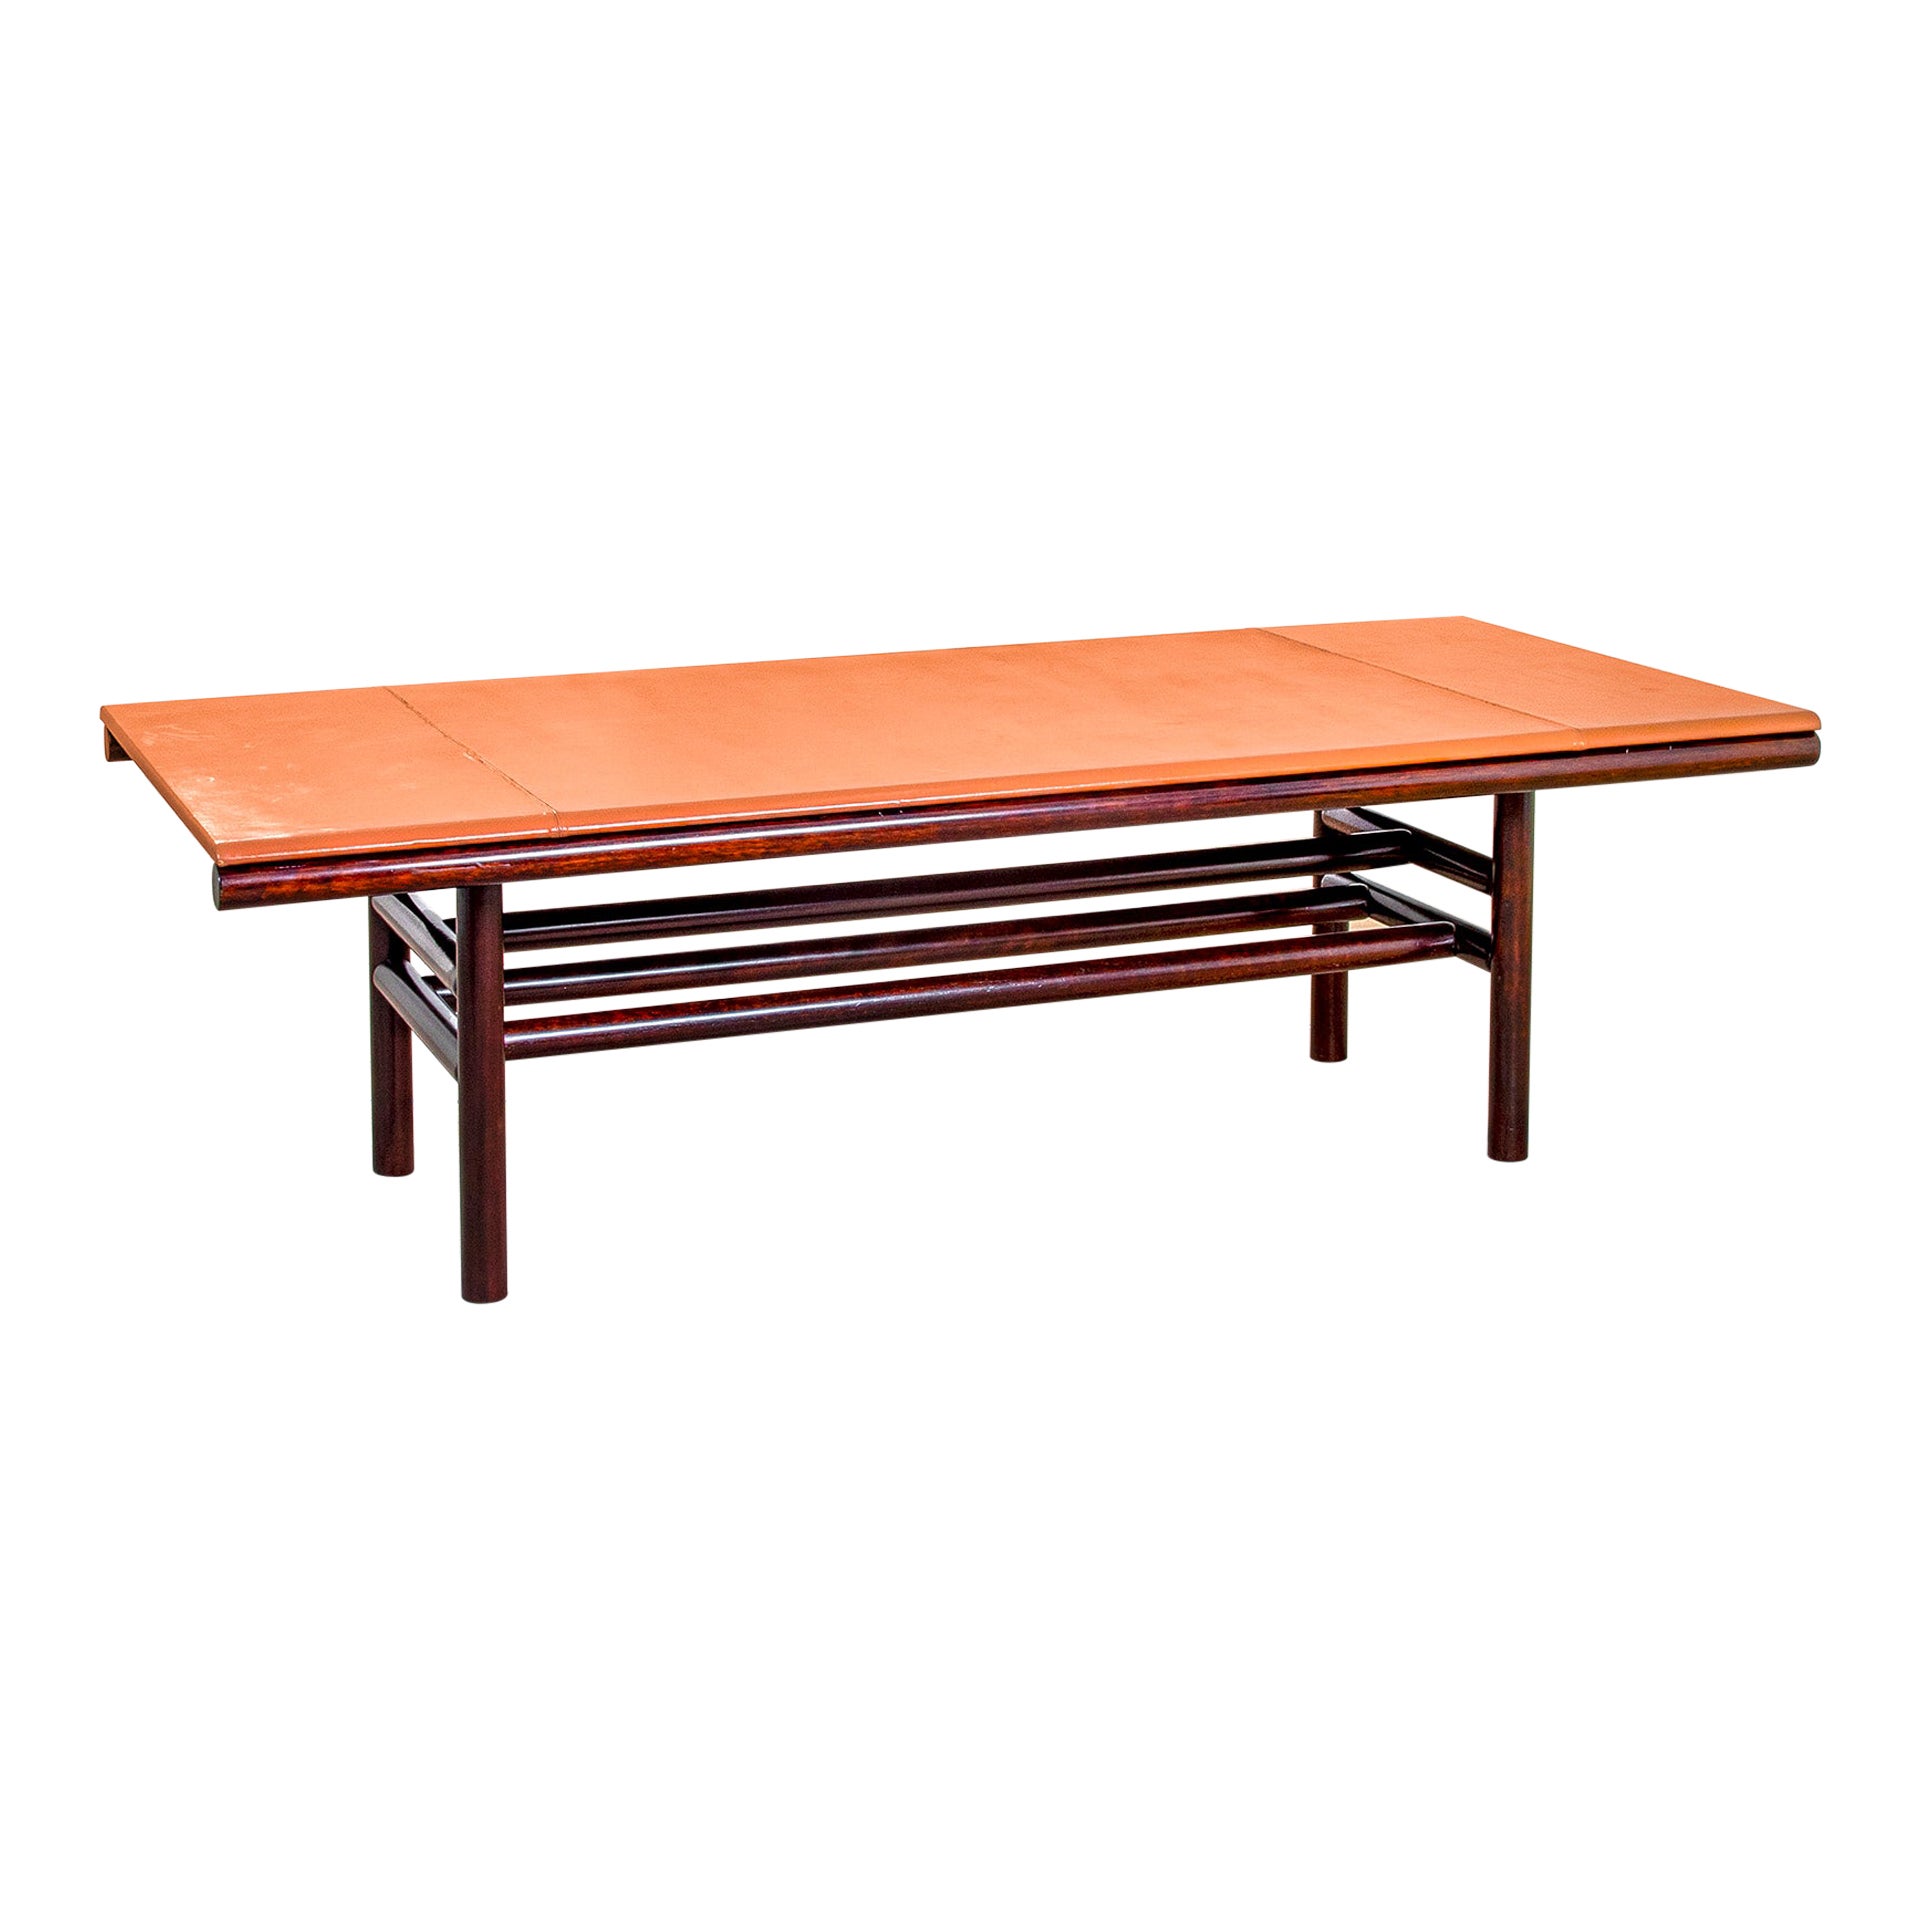 20th Century Carlo Scarpa Table Mod. Gritti Wood and Leather, '70